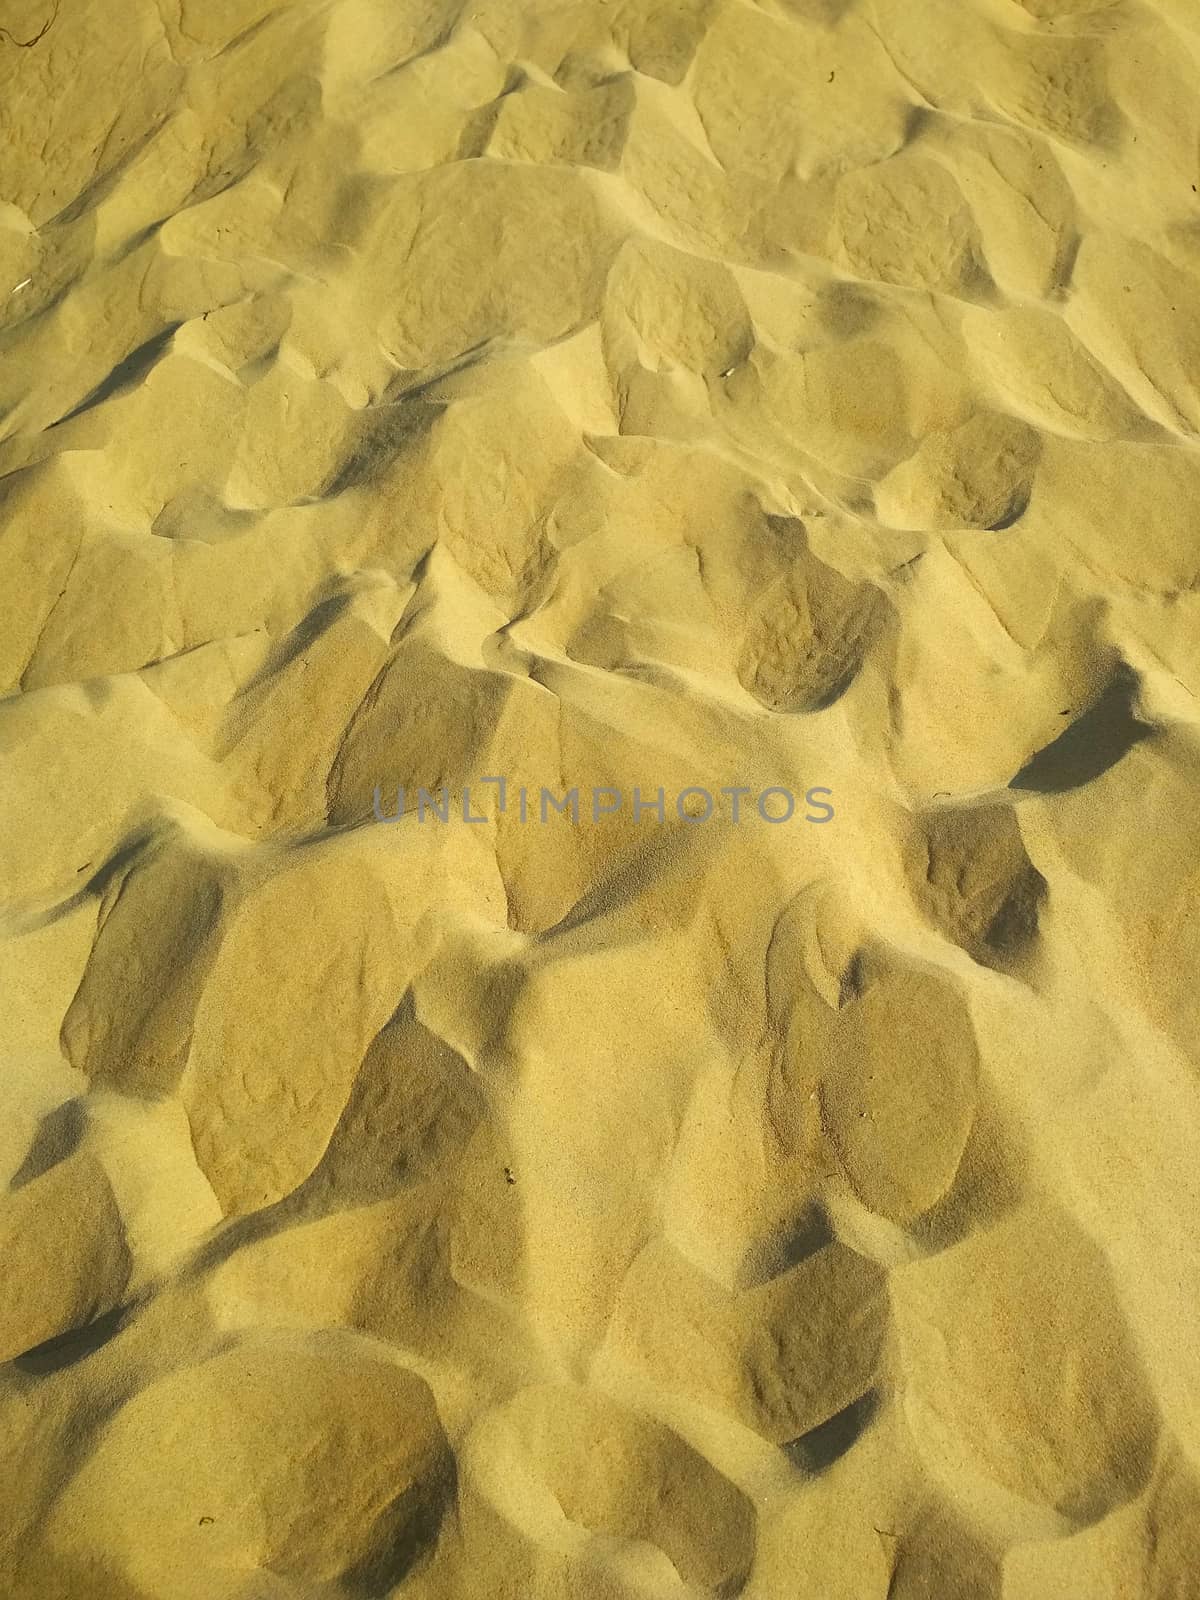 Texture of sandy soil with small pits and hills of yellow color.